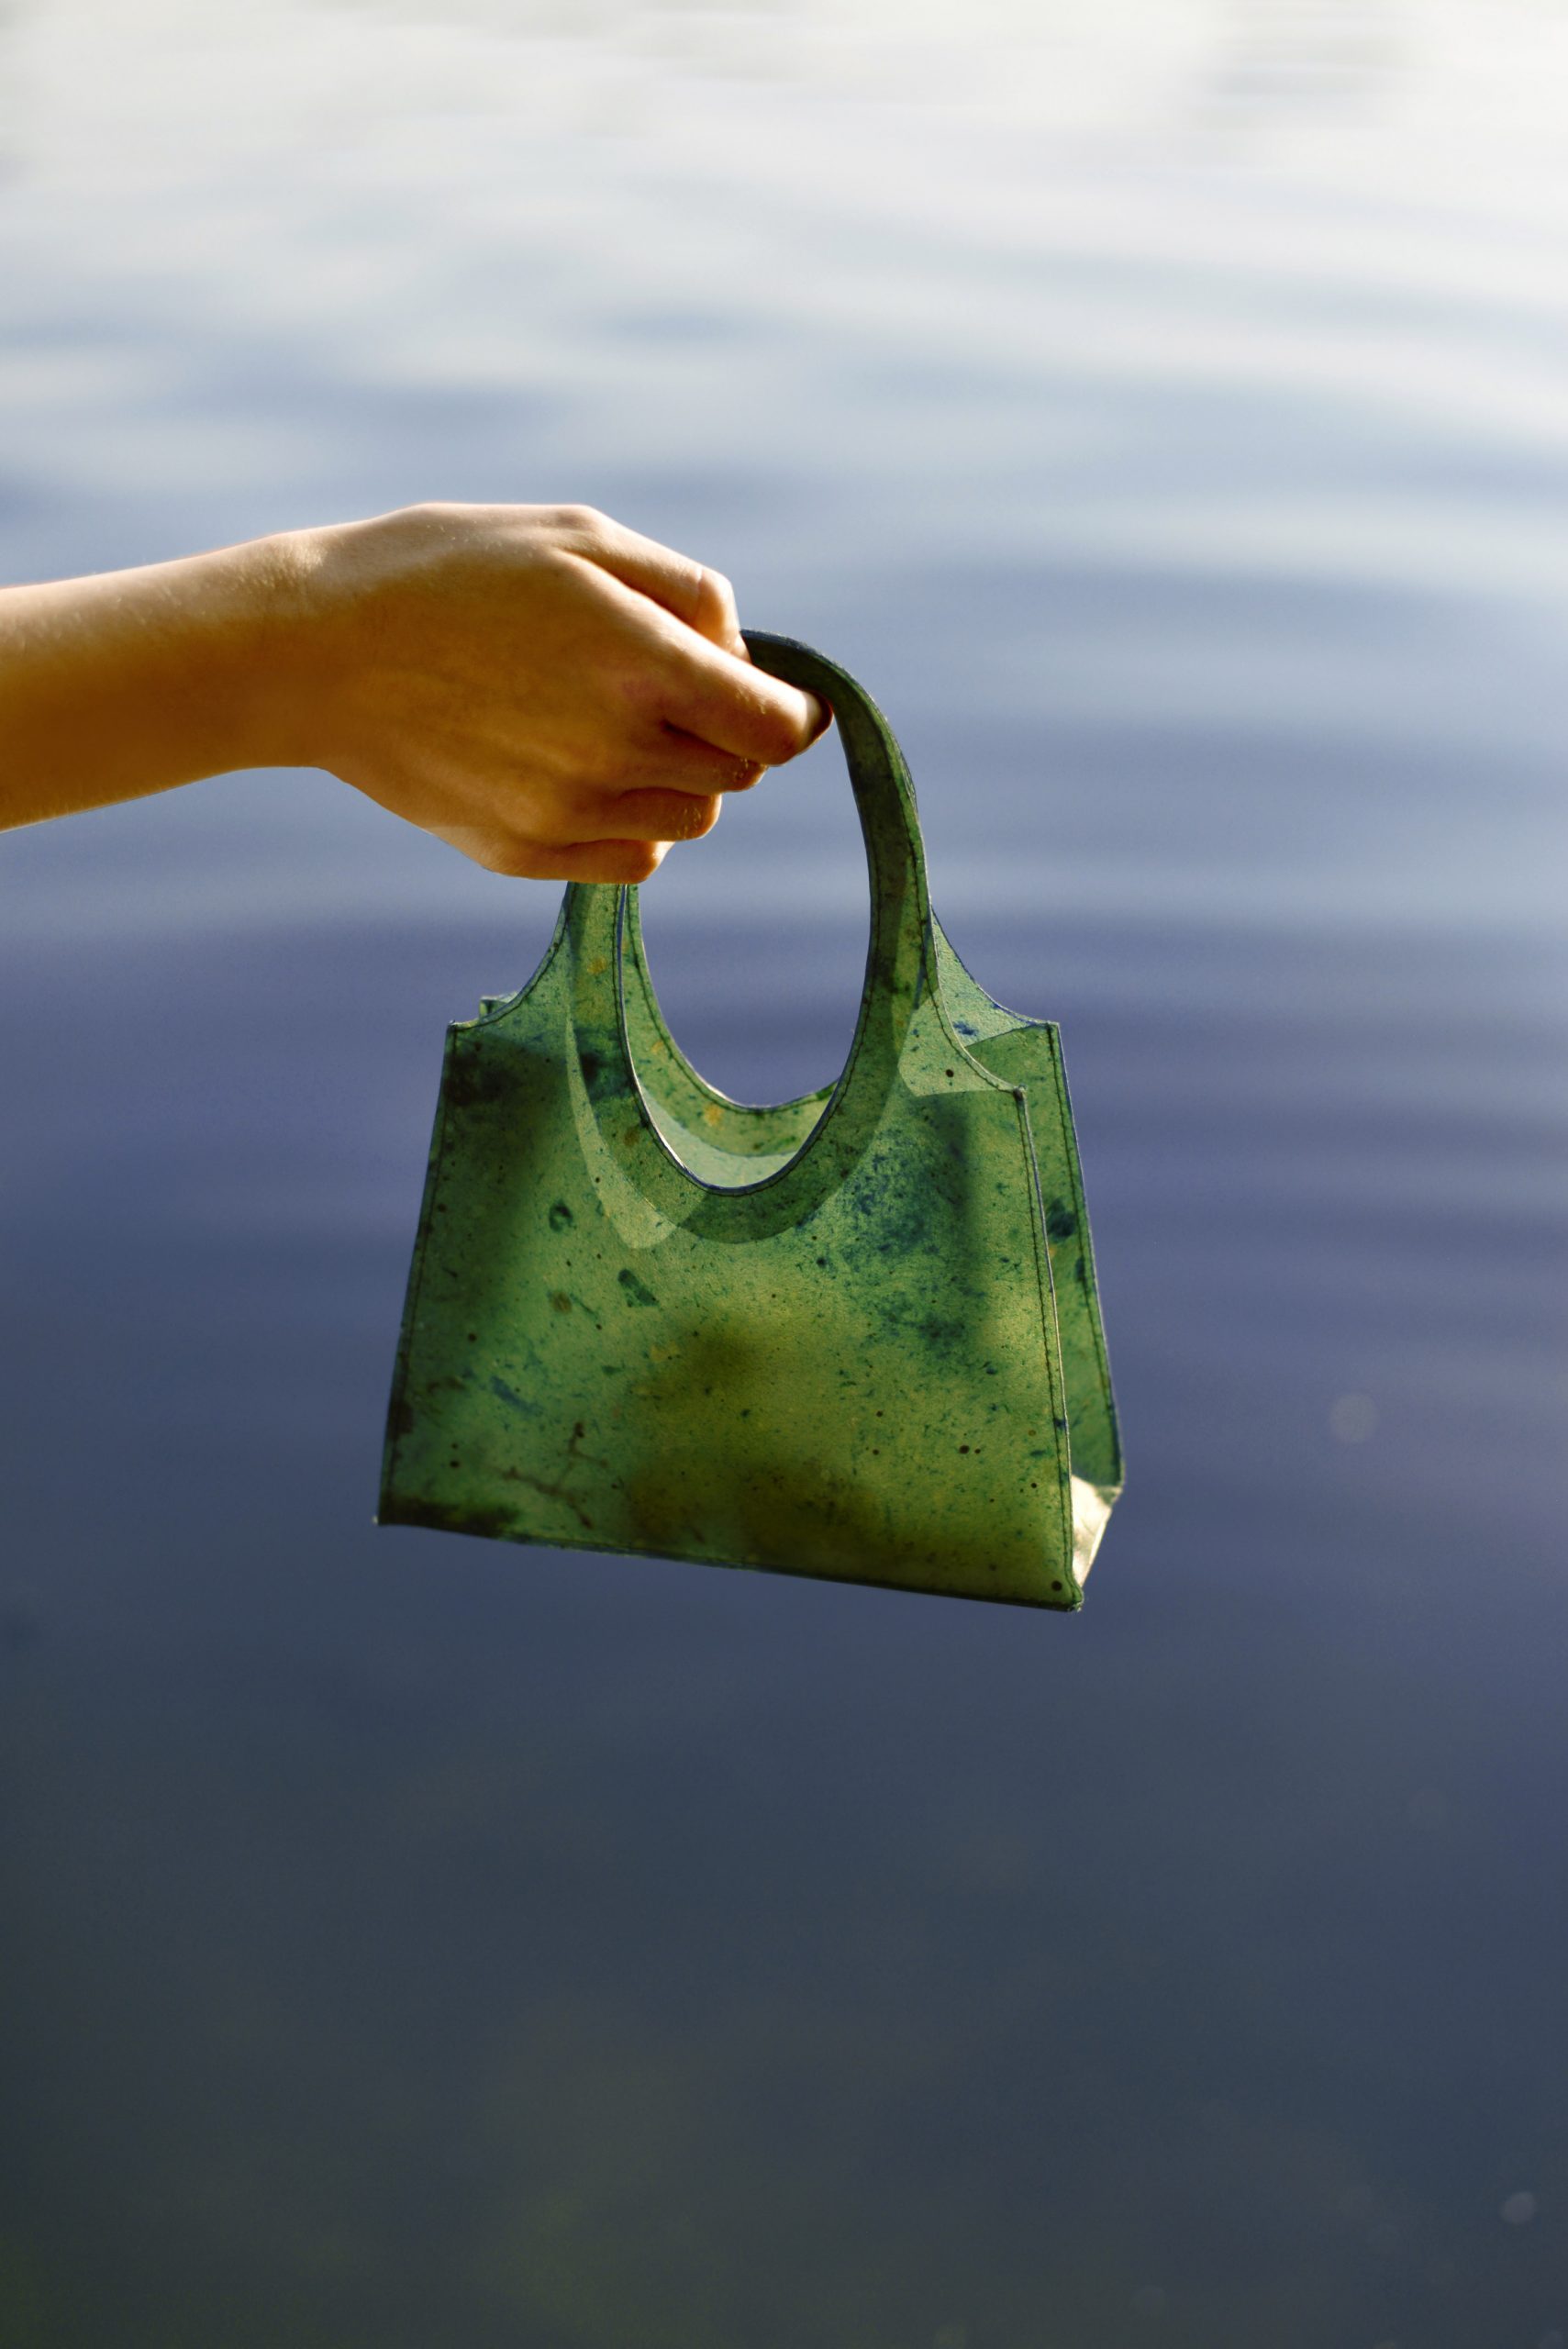 Green Sonnet155 carrier bag being dangled over water